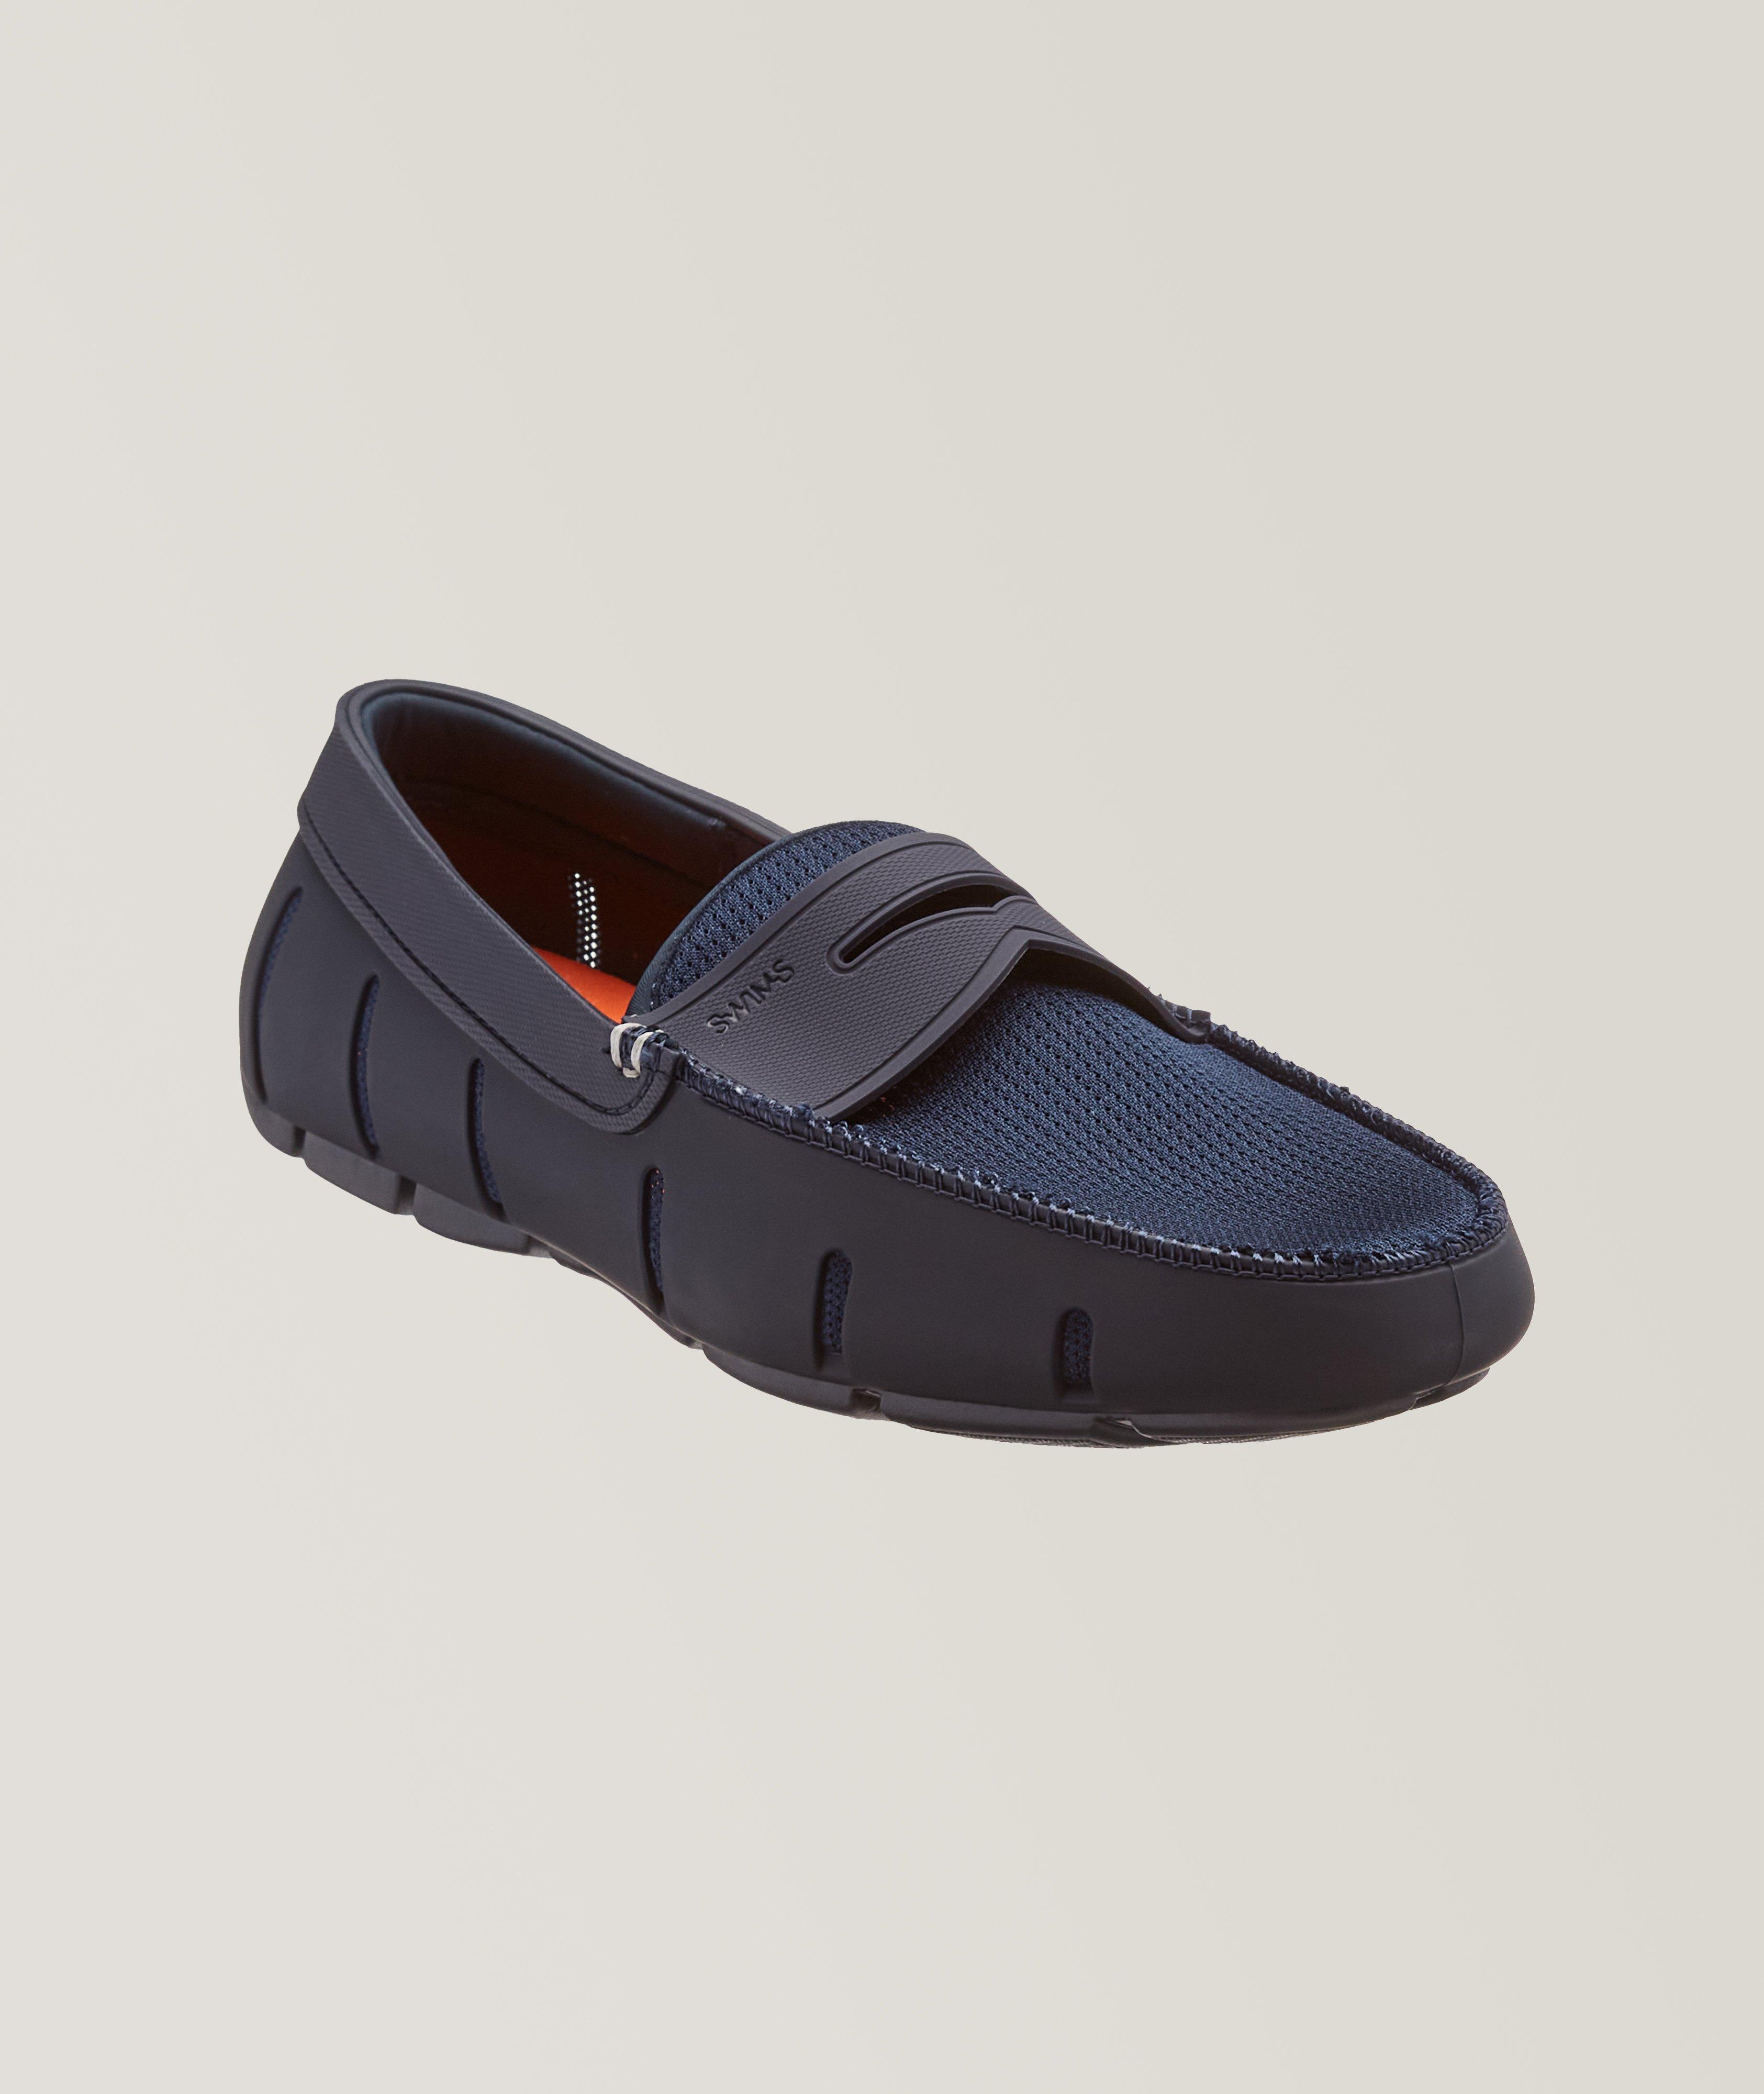 Classic Penny Loafers image 0